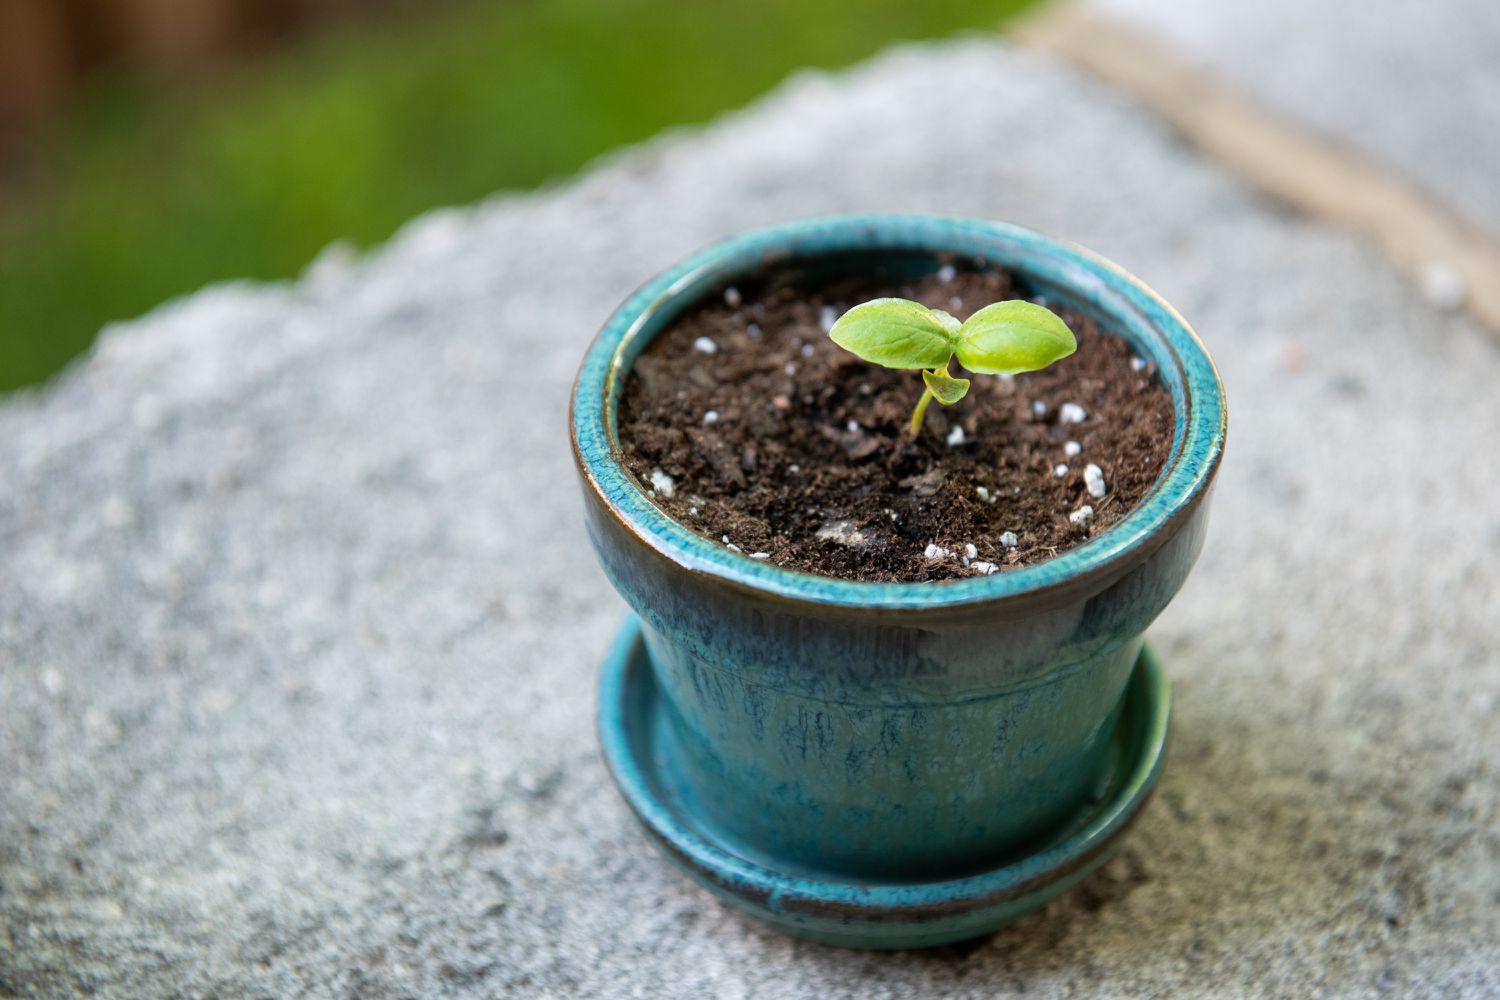 How To Plant Basil Seeds